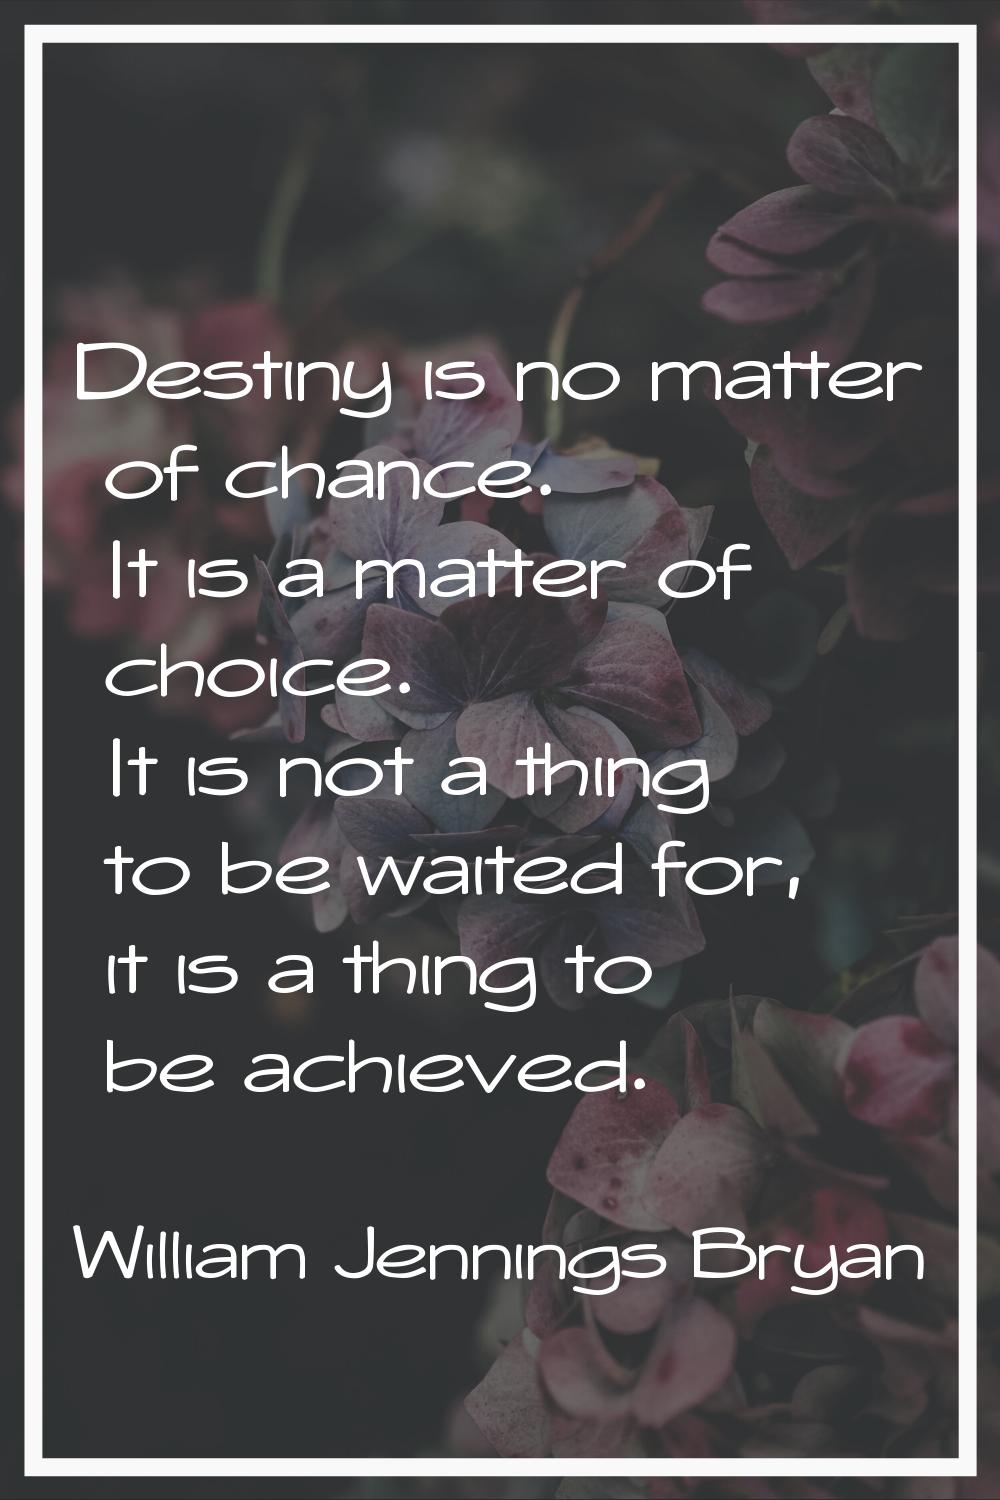 Destiny is no matter of chance. It is a matter of choice. It is not a thing to be waited for, it is